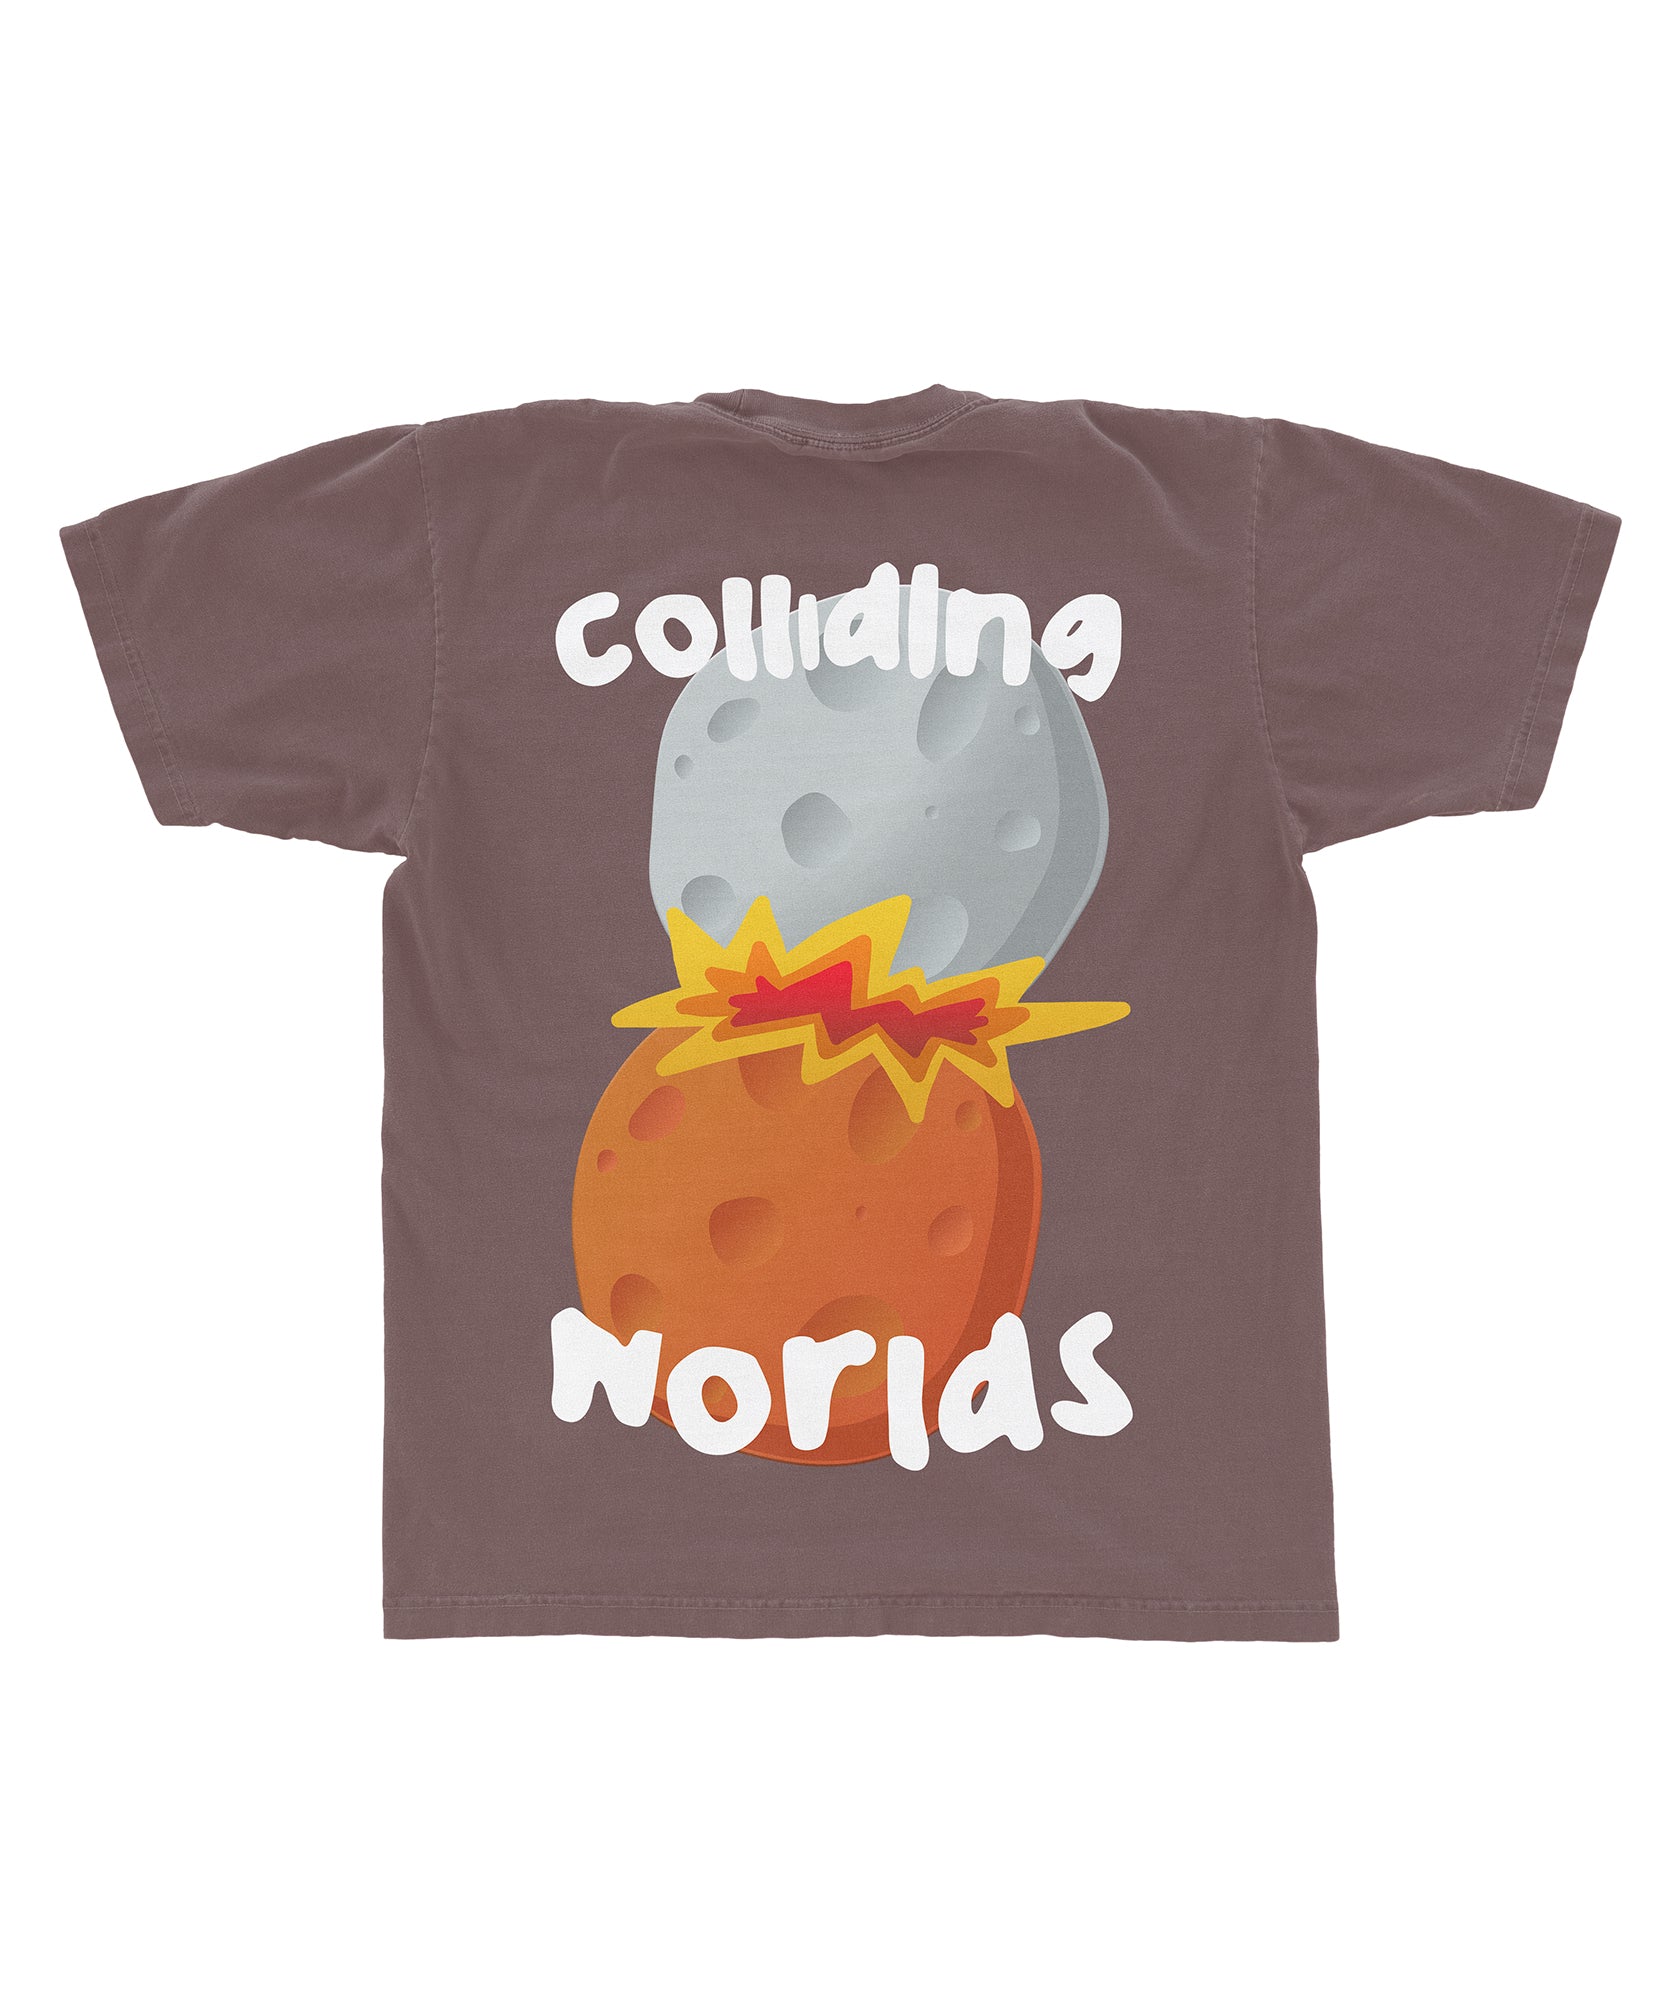 [MADE BY] COLLIDING WORLDS